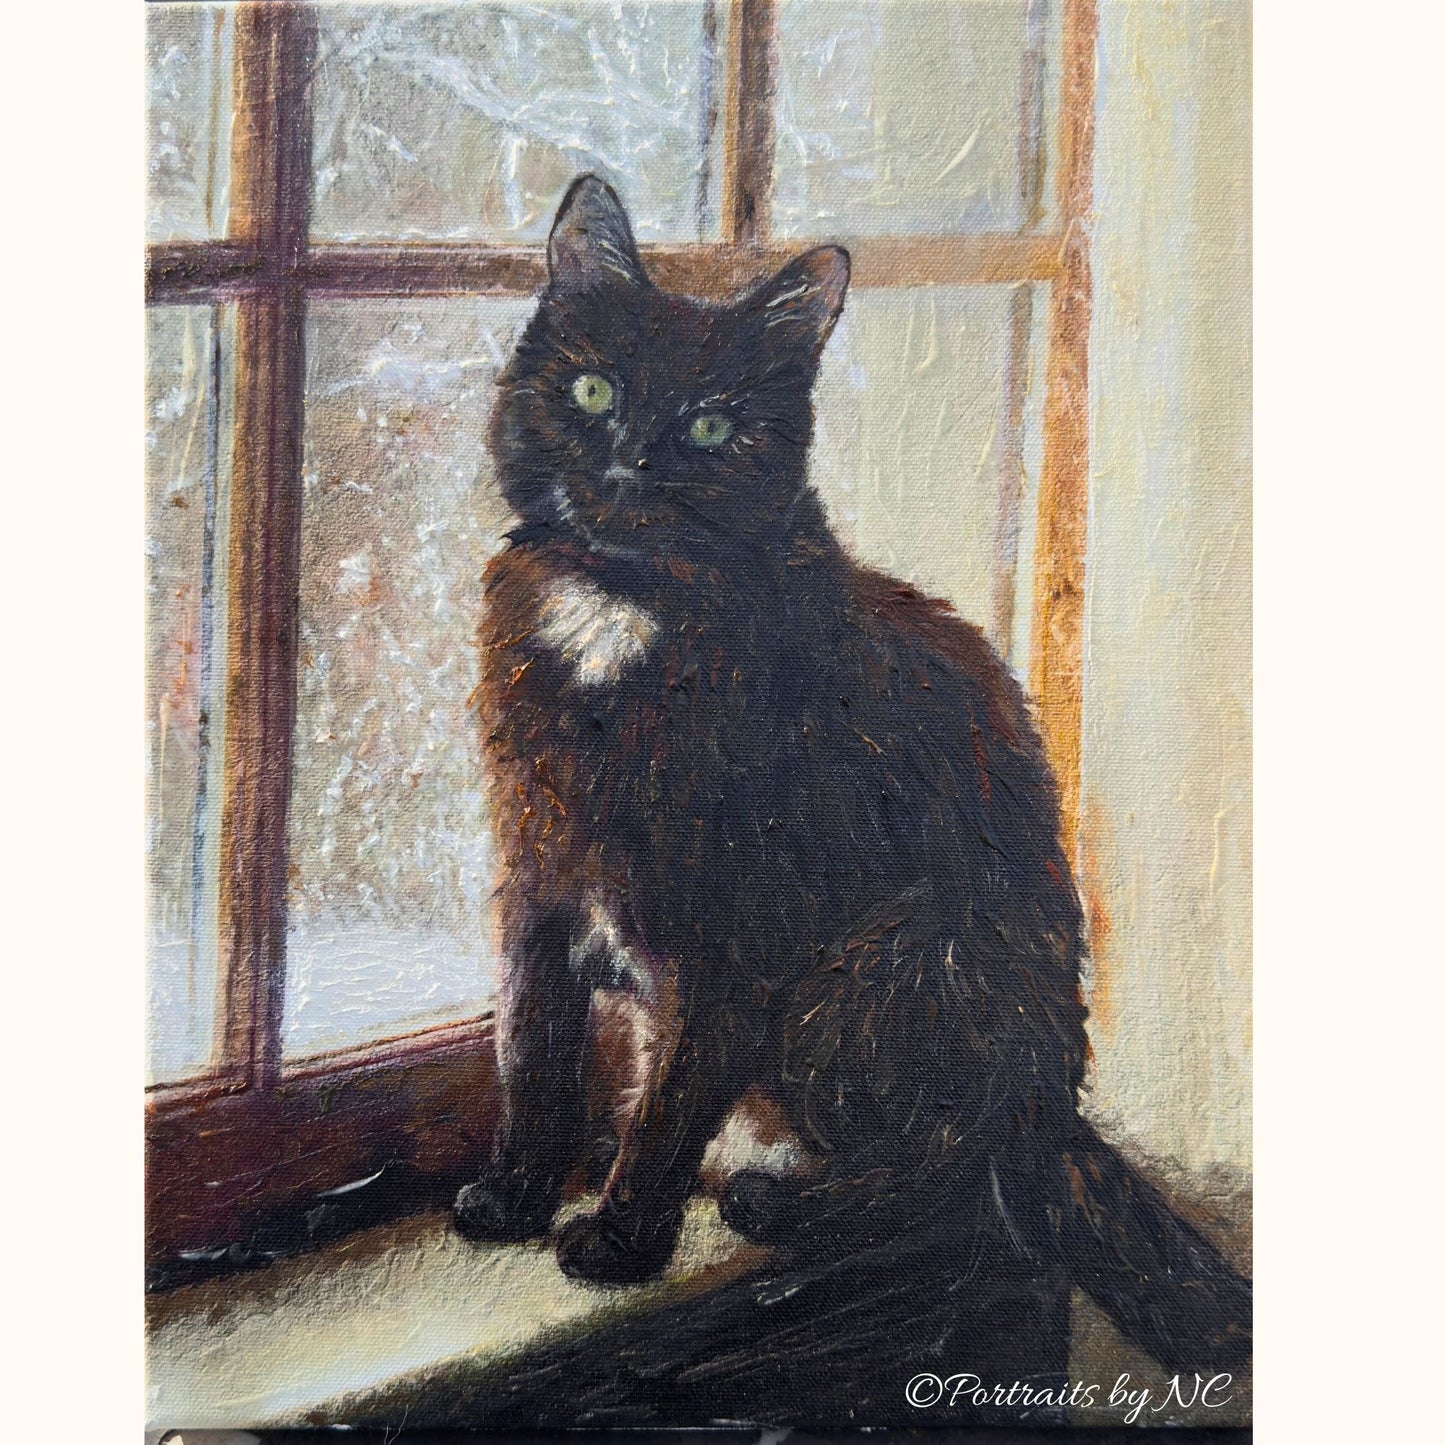 A Winter Cat Portrait to Remember